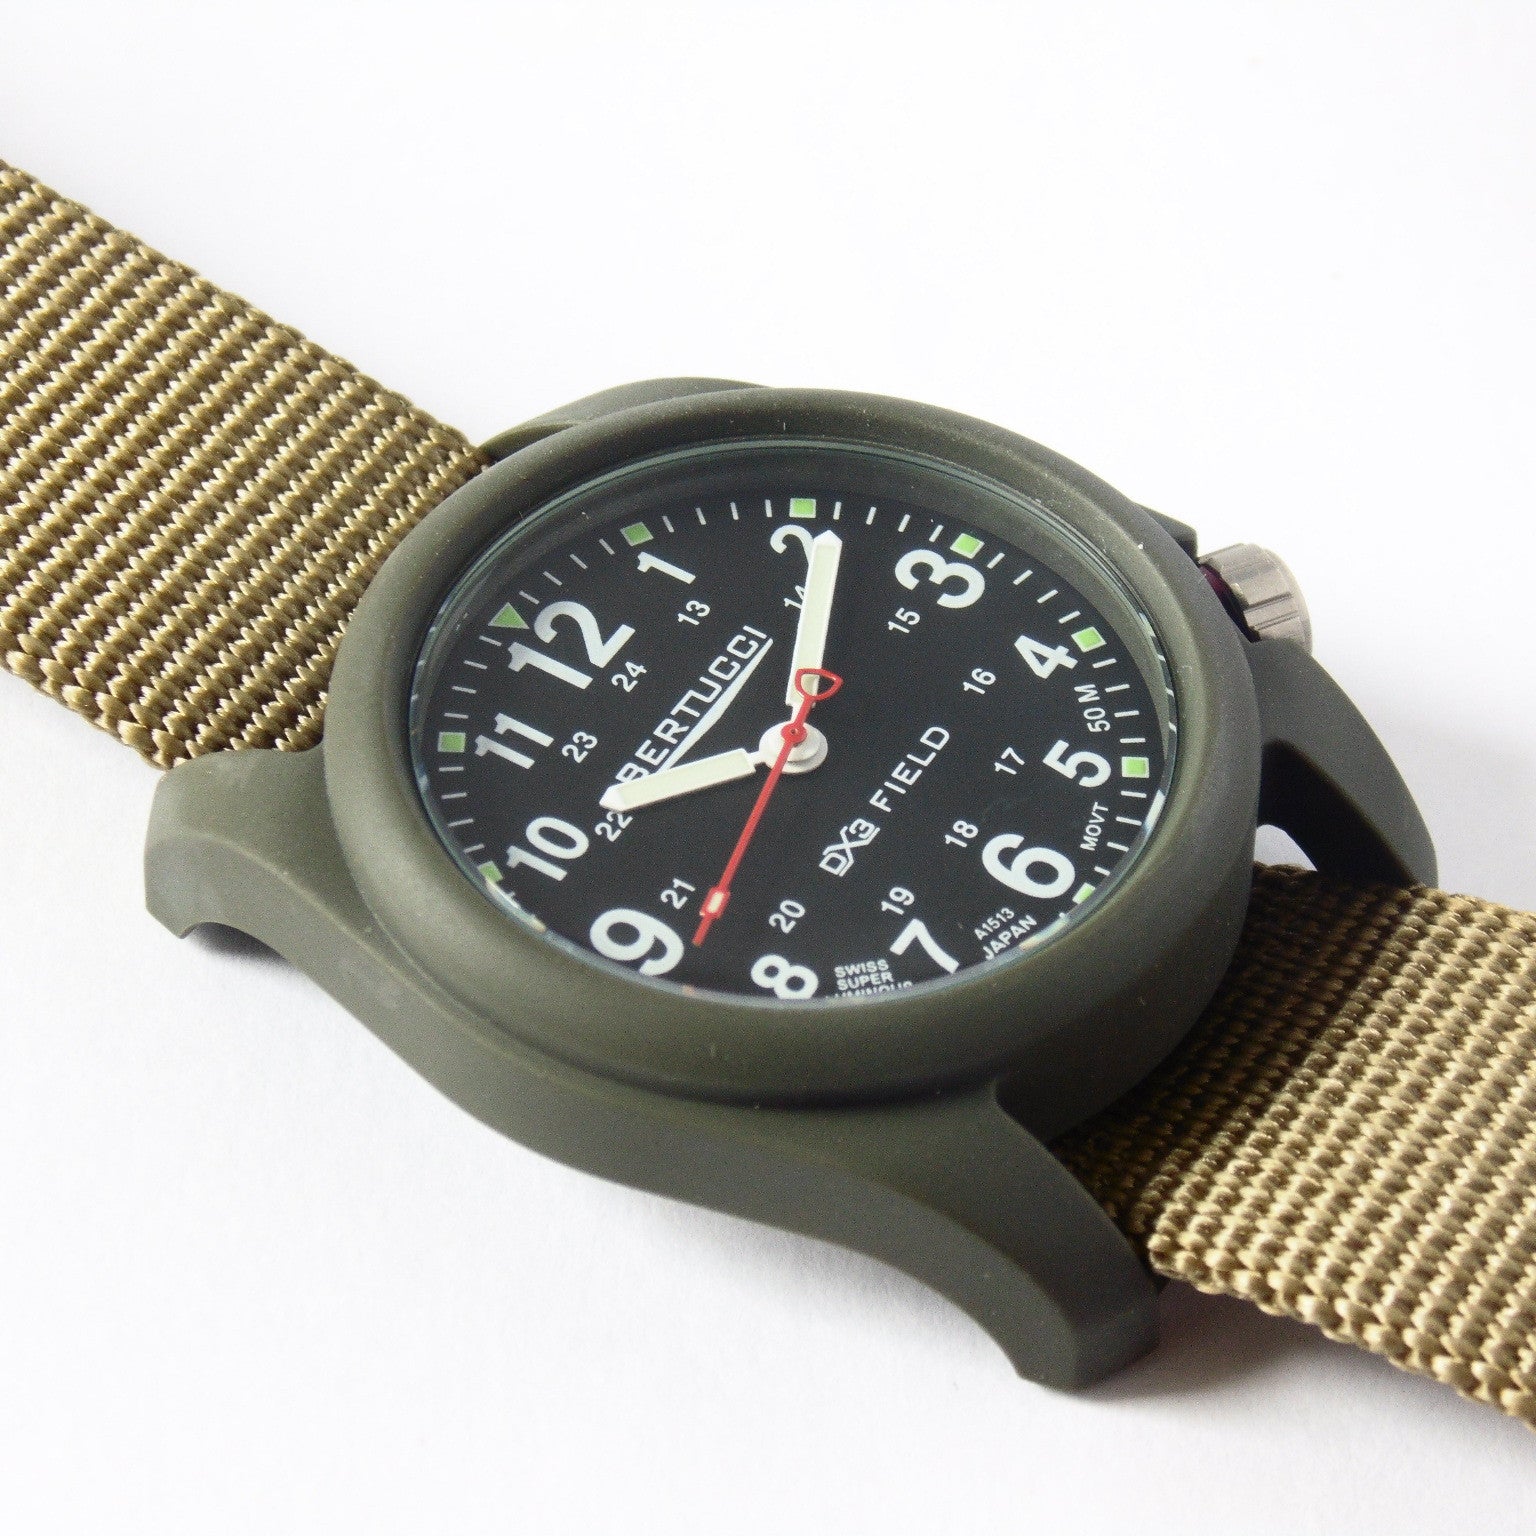 Bertucci DX3 Olive Resin Watch, Coyote Nylon Strap, Black Dial - 11027 - Watchfinder General - UK suppliers of Russian Vostok Parnis Watches MWC G10
 - 2